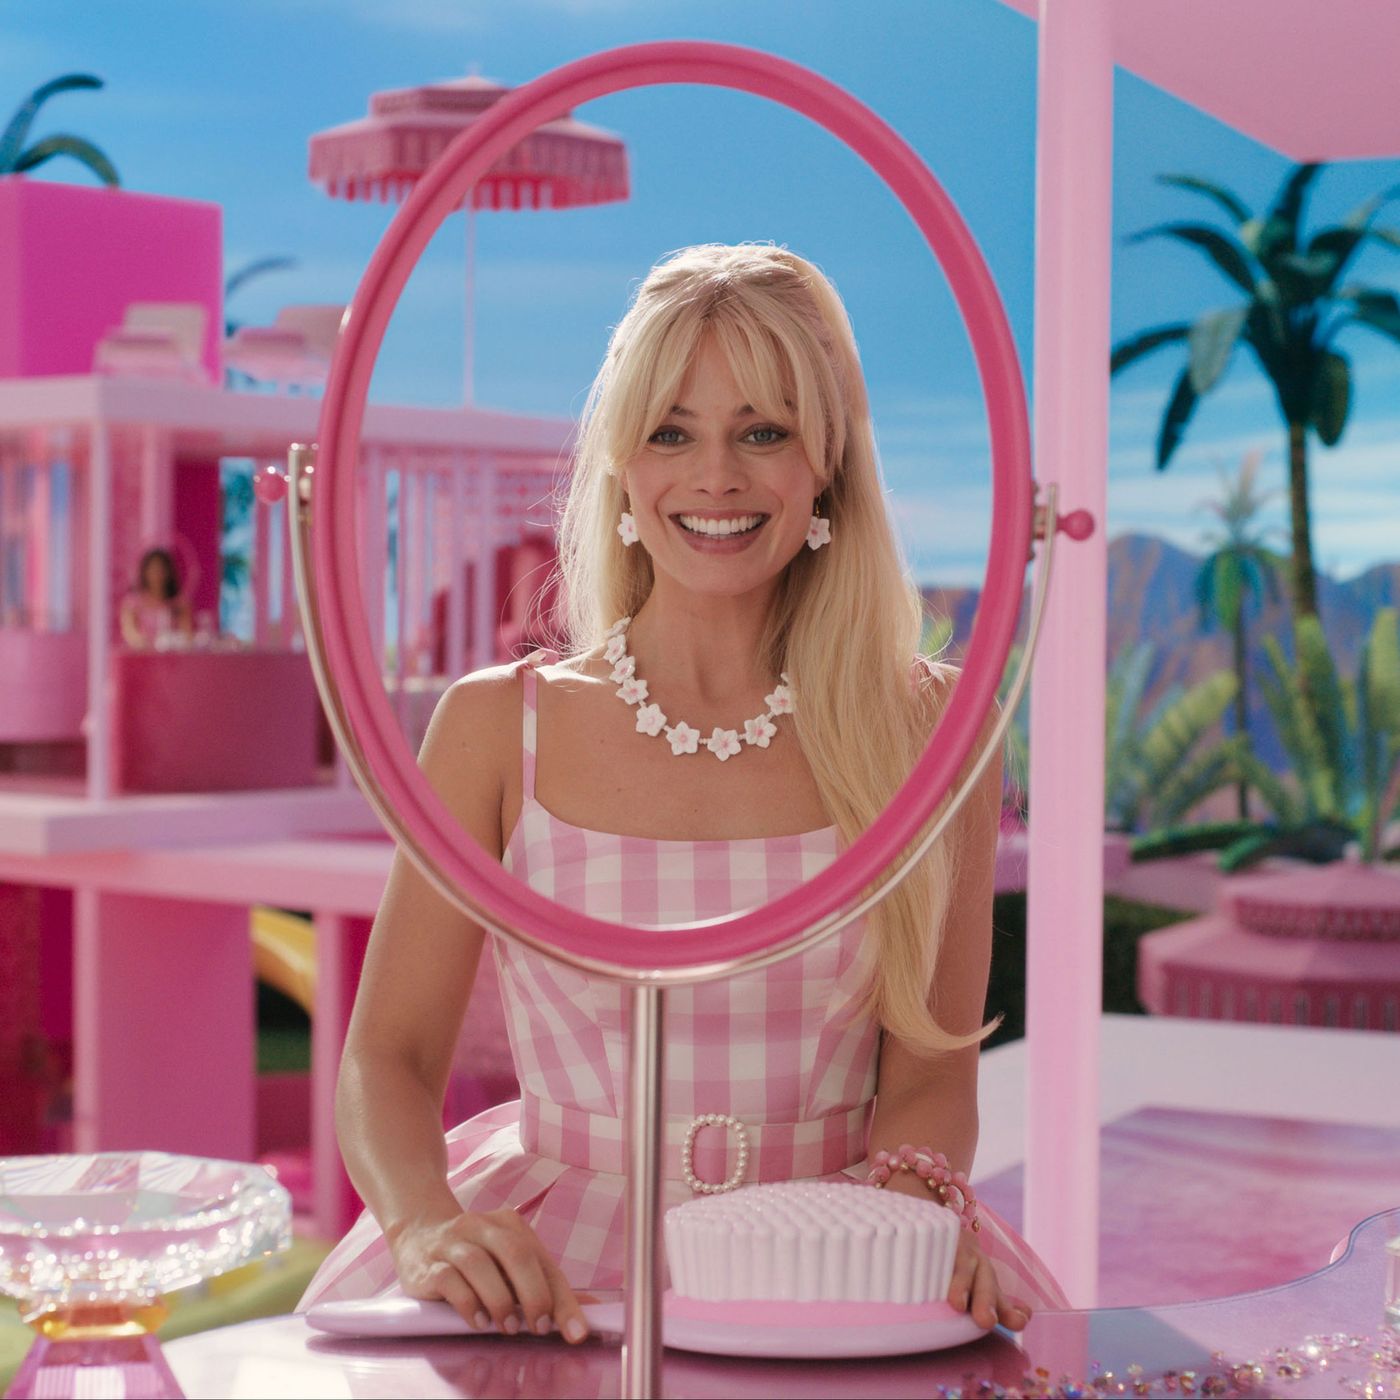 Margot Robbie Barbie Movie Guide to Release Date, Cast News, and Spoilers